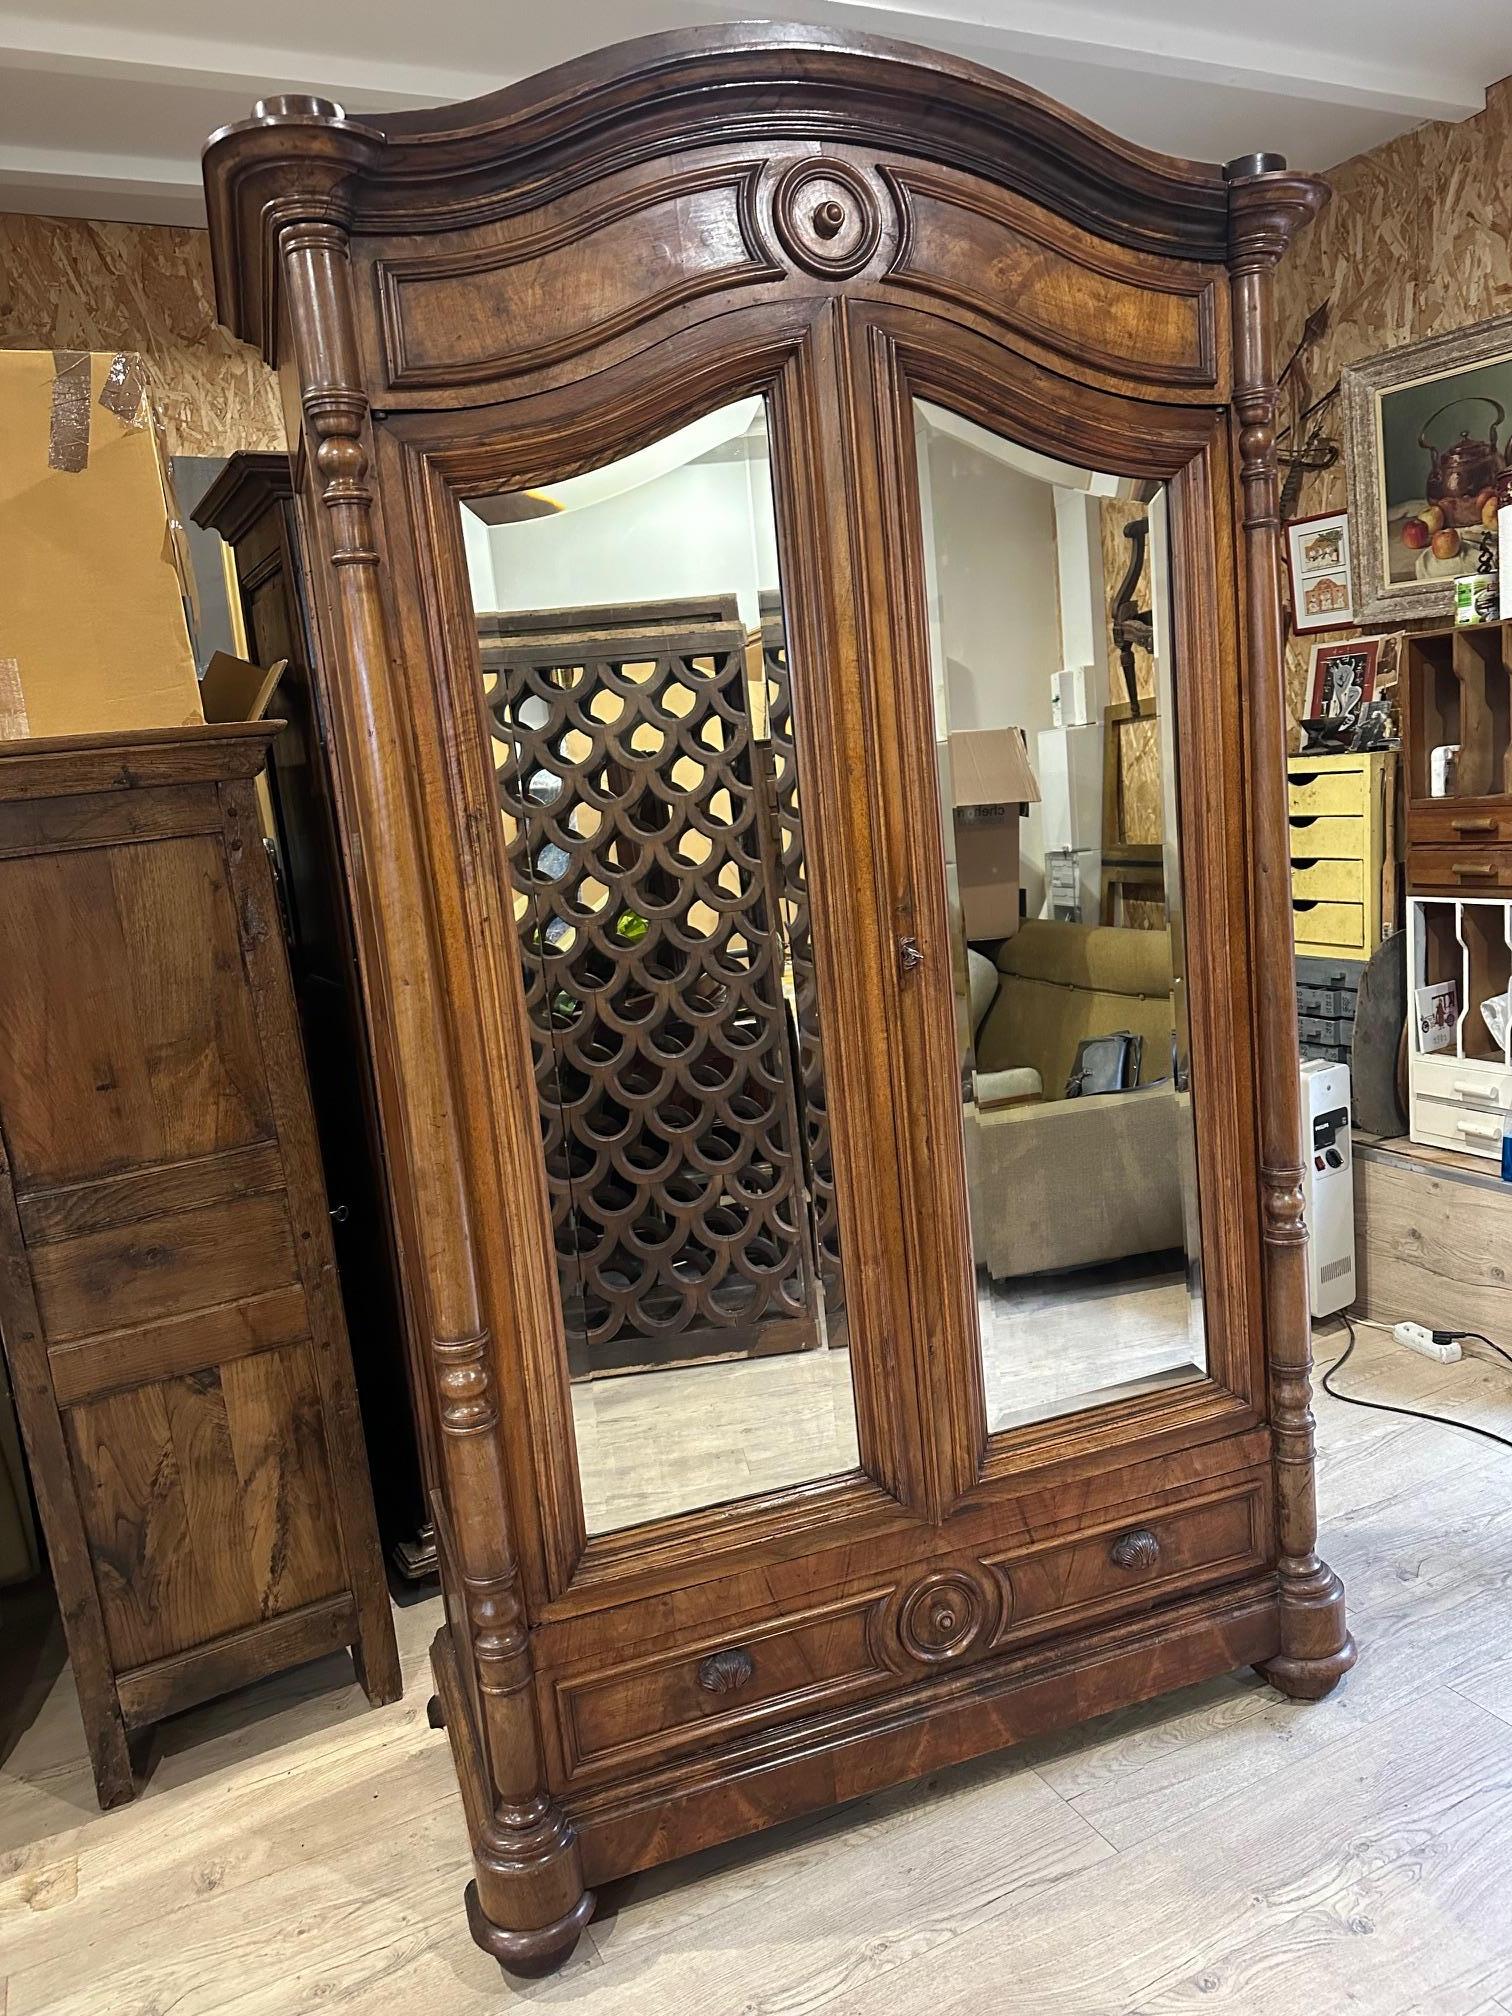 Very beautiful high quality walnut mirror wardrobe dating from the beginning of the 20th century (1900s).
Fully removable. Four modular shelves to suit your convenience.
Two doors with beveled glass mirrors. Large drawer with two shell handles.